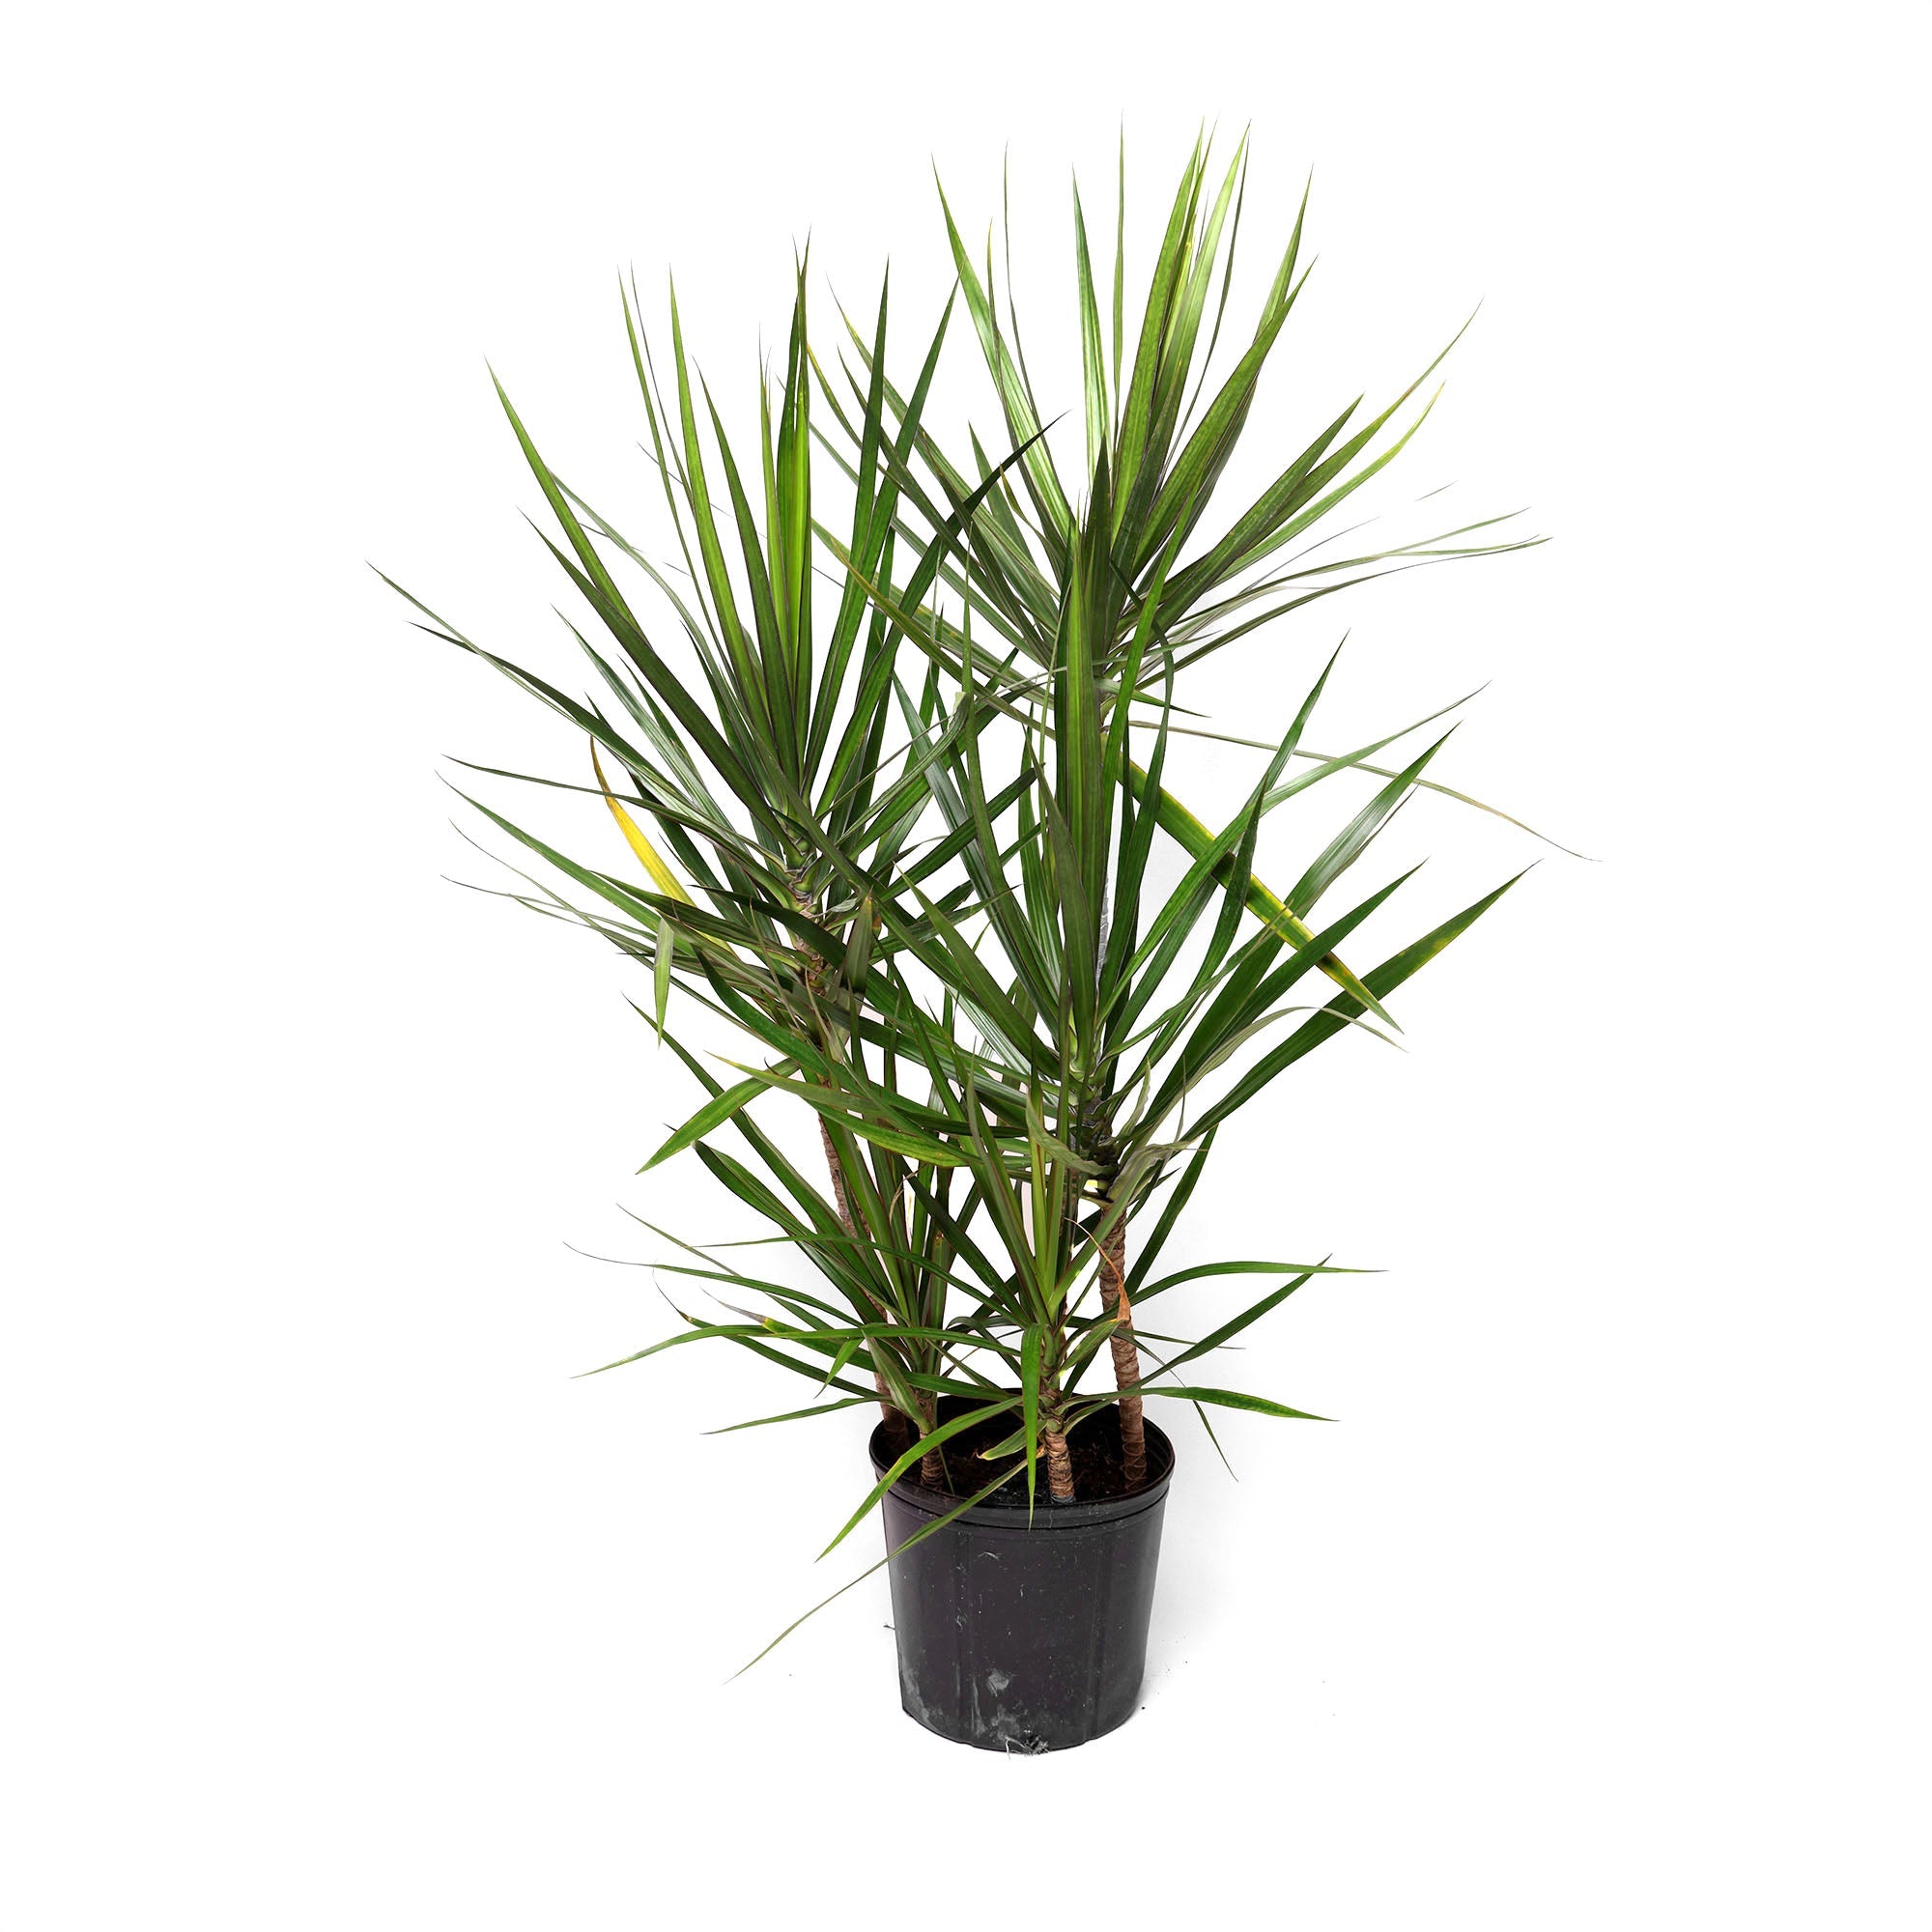 A **Chive Studio 2024 Dracaena Marginata Cutback Staggered 10 Inch Pot** with long, slender green leaves edged in dark red. Known for its air-purifying qualities, the plant has multiple stems growing from the dark pot, providing a full and bushy appearance. Ideal for indoor gardening, the plain white background highlights its vibrant foliage.
